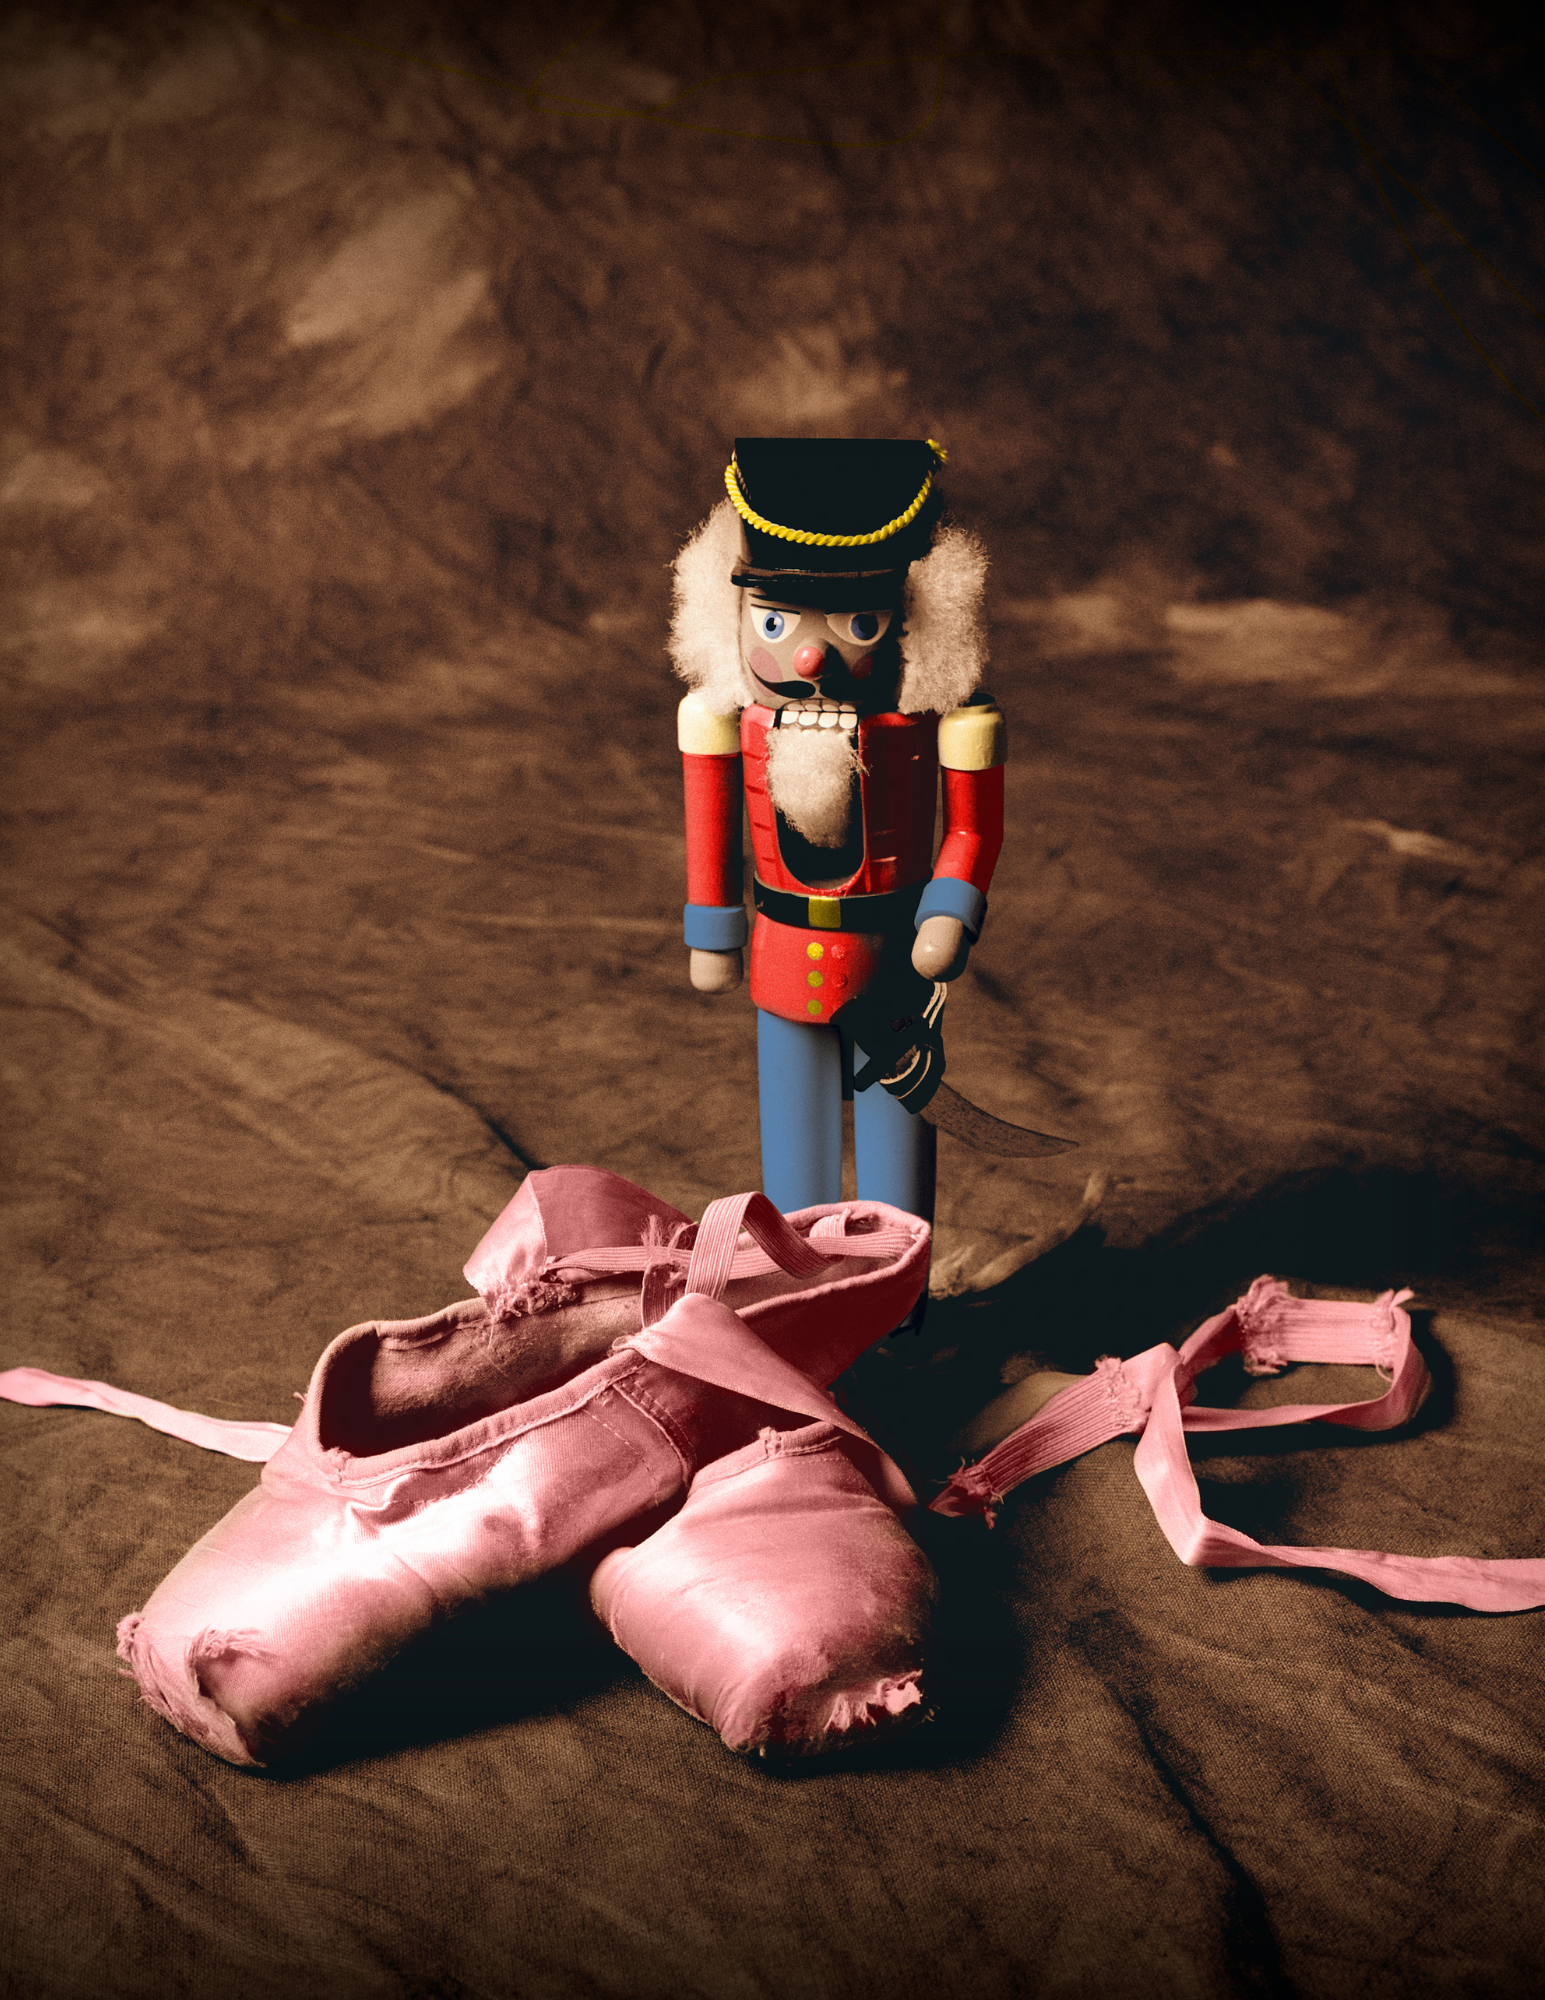 Nutcracker next to a pair of ballet slippers